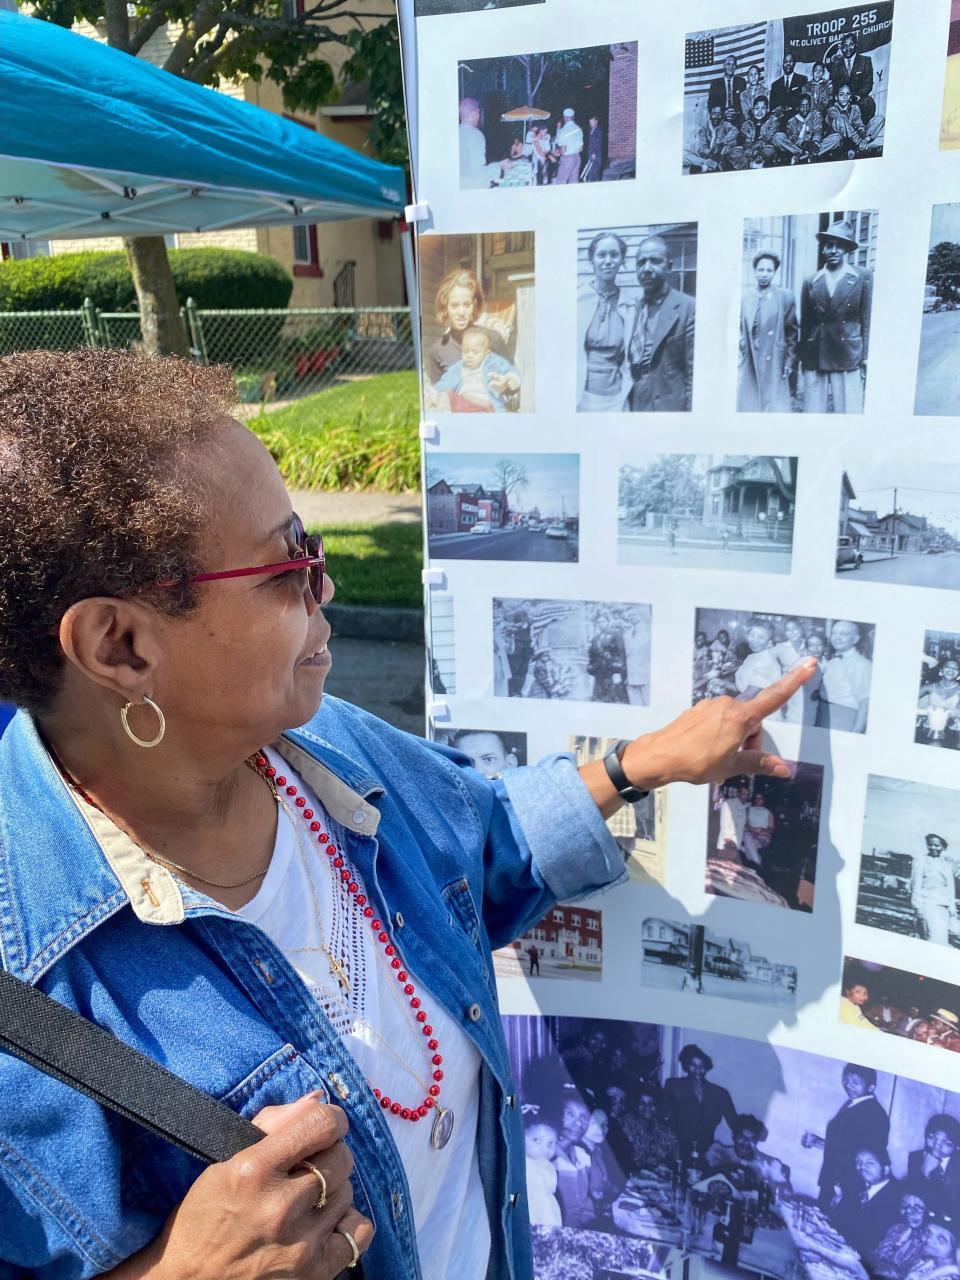 Toni Lomax is a lifelong Rochester resident who grew up in the Third Ward before it was known as Corn Hill. She’s pointing at her mother, Mary Tyson, who worked at the Pythodd Club.